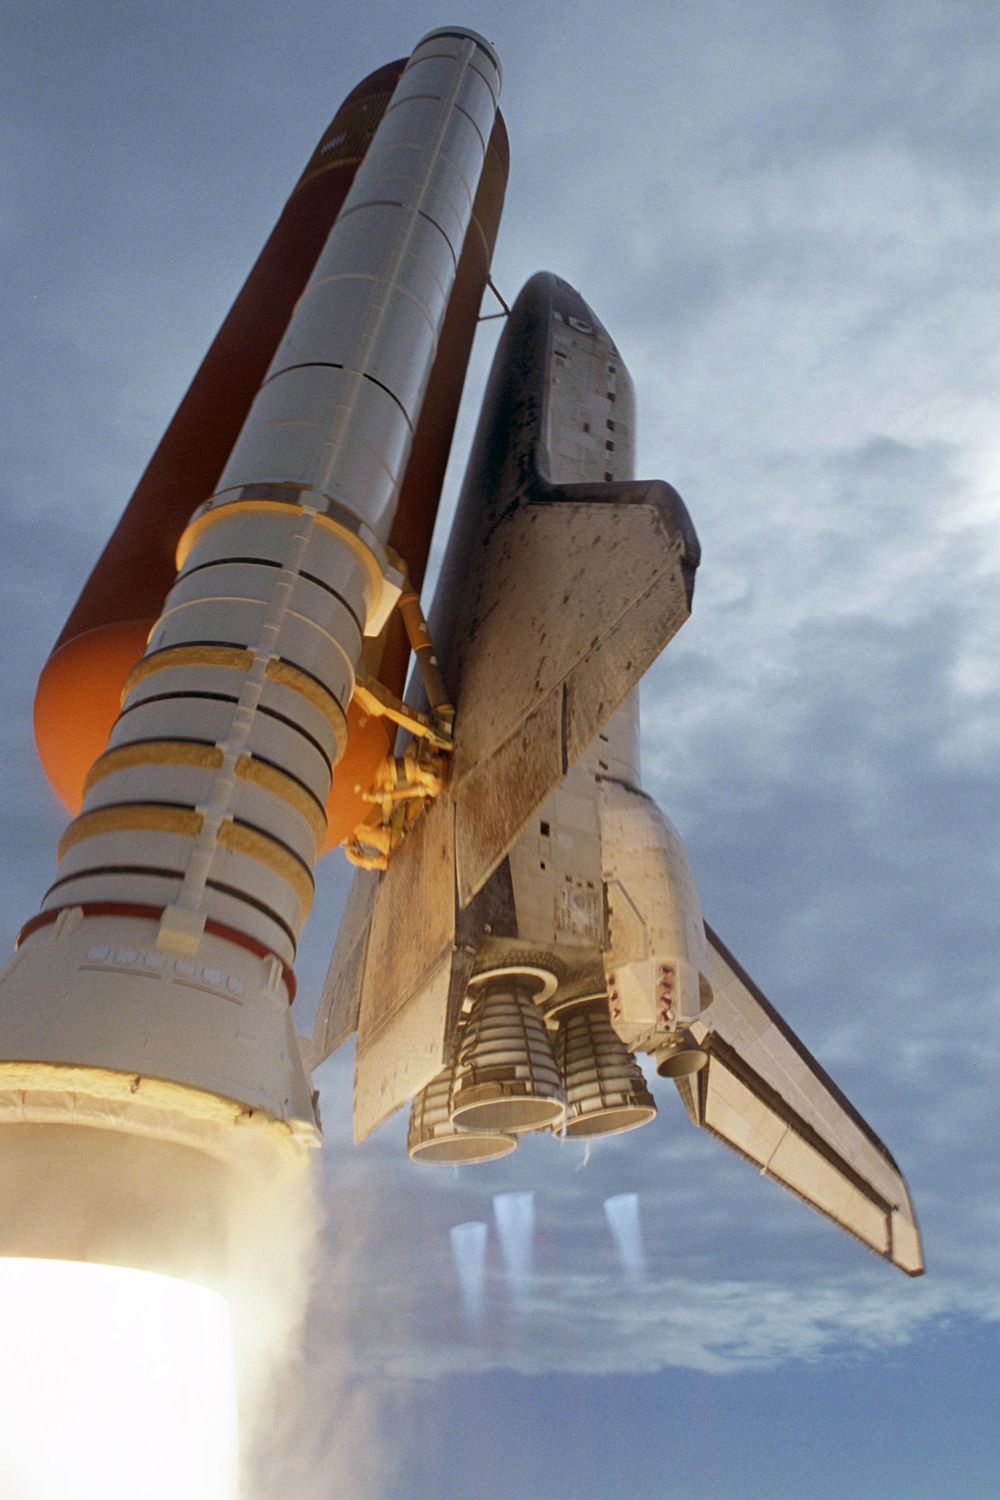 space shuttle in space